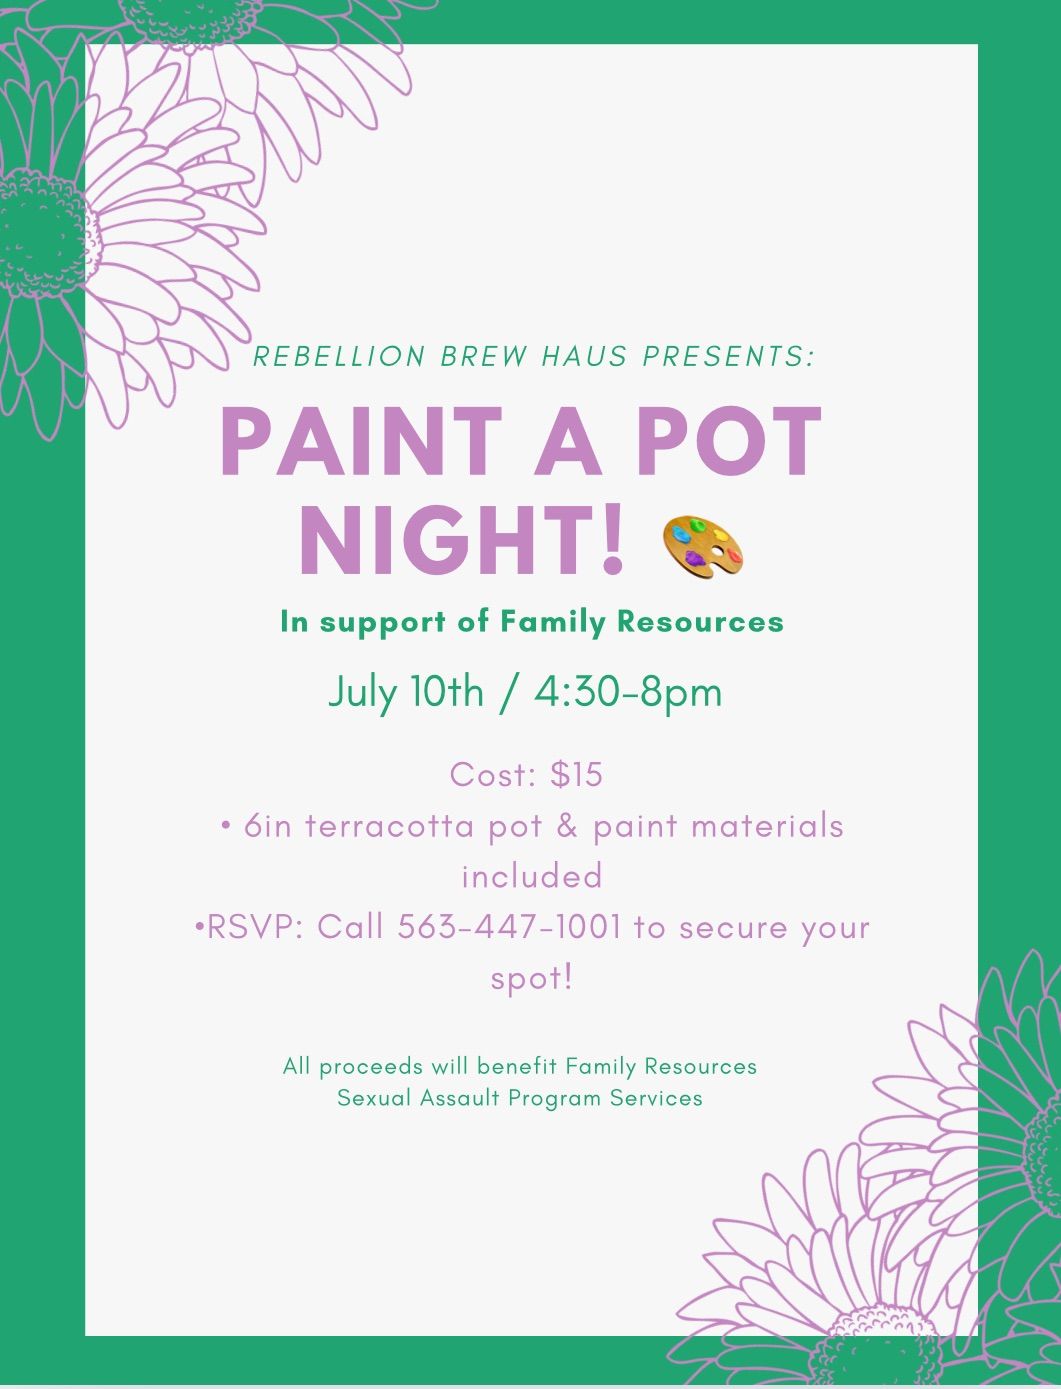 Paint a pot night: In support of Family Resources. 